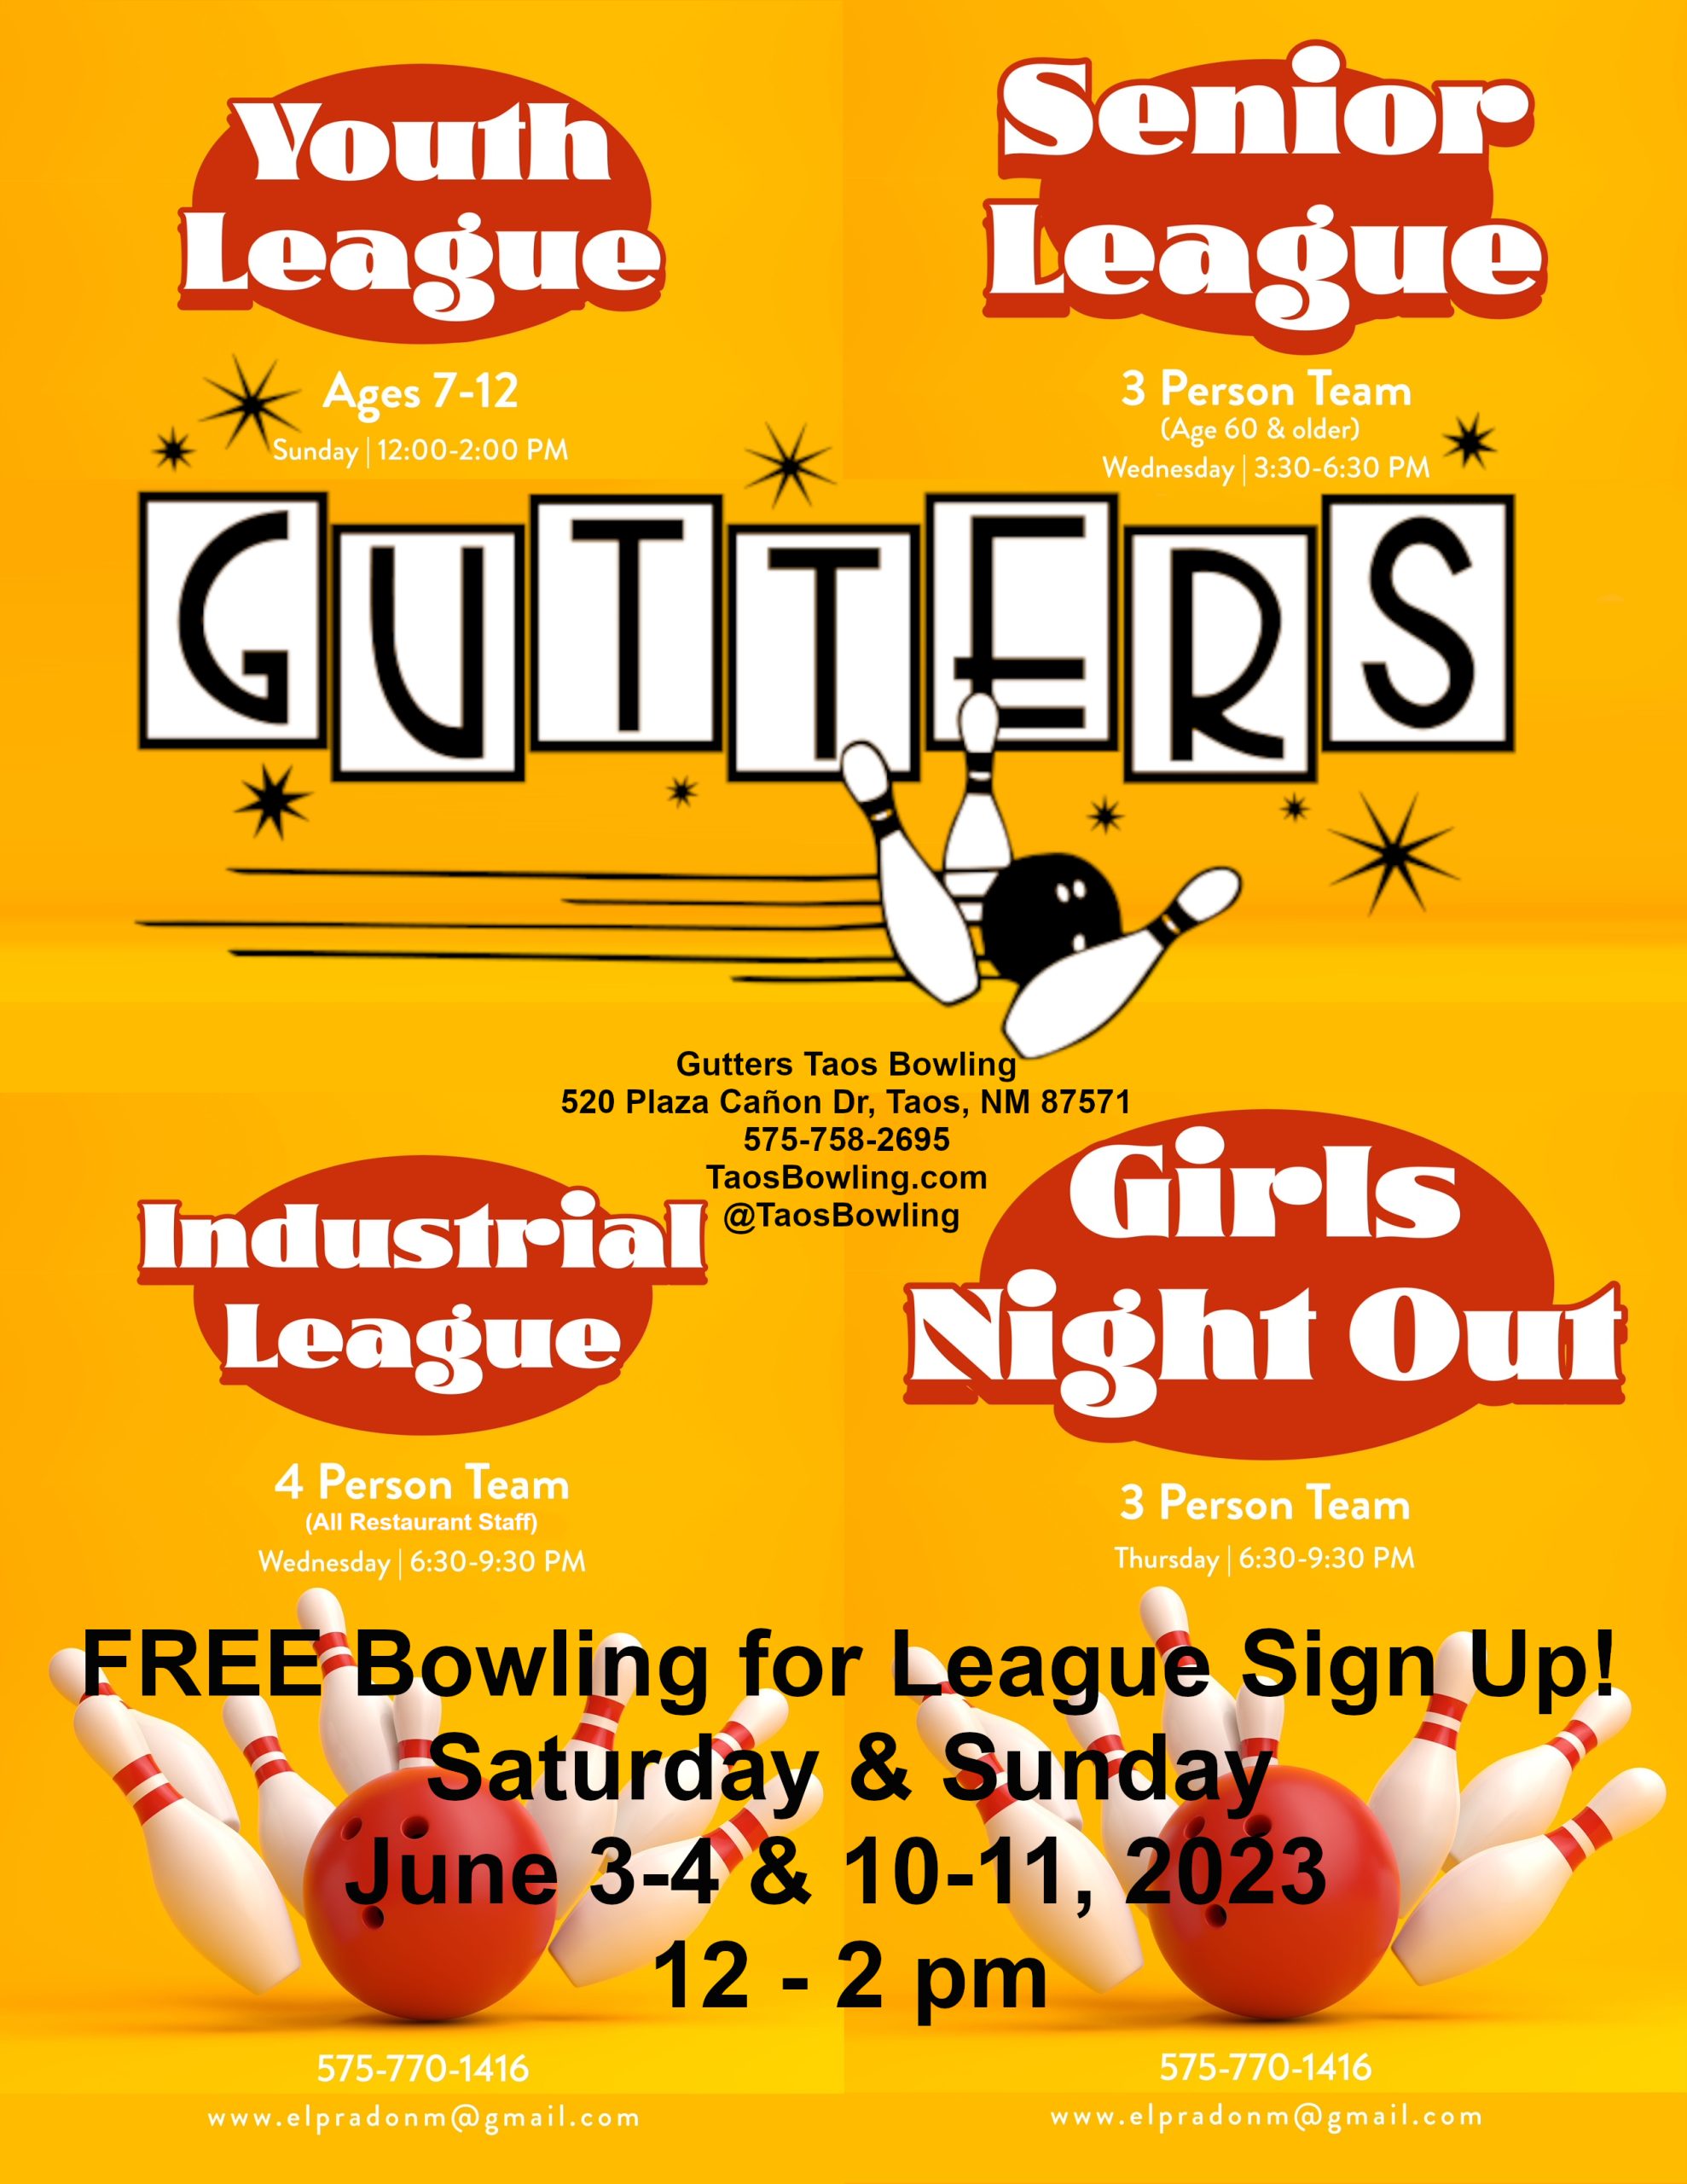 FREE Bowling for League Sign Up